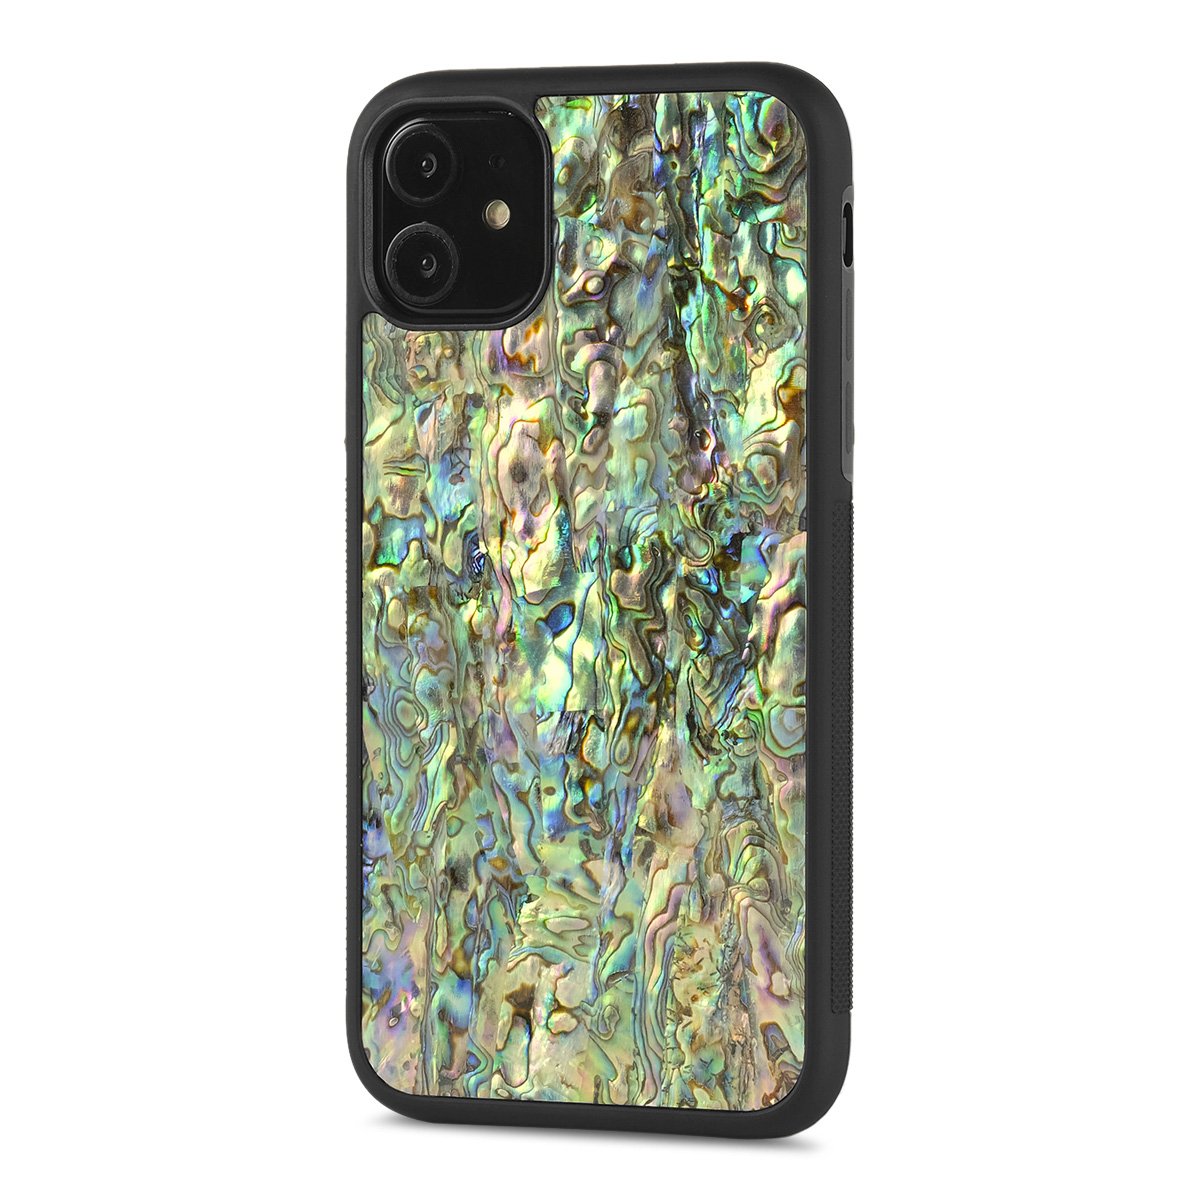 Green Abalone Iphone 11 Pro Max Shell Explorer Case Shell Cases Cover Up